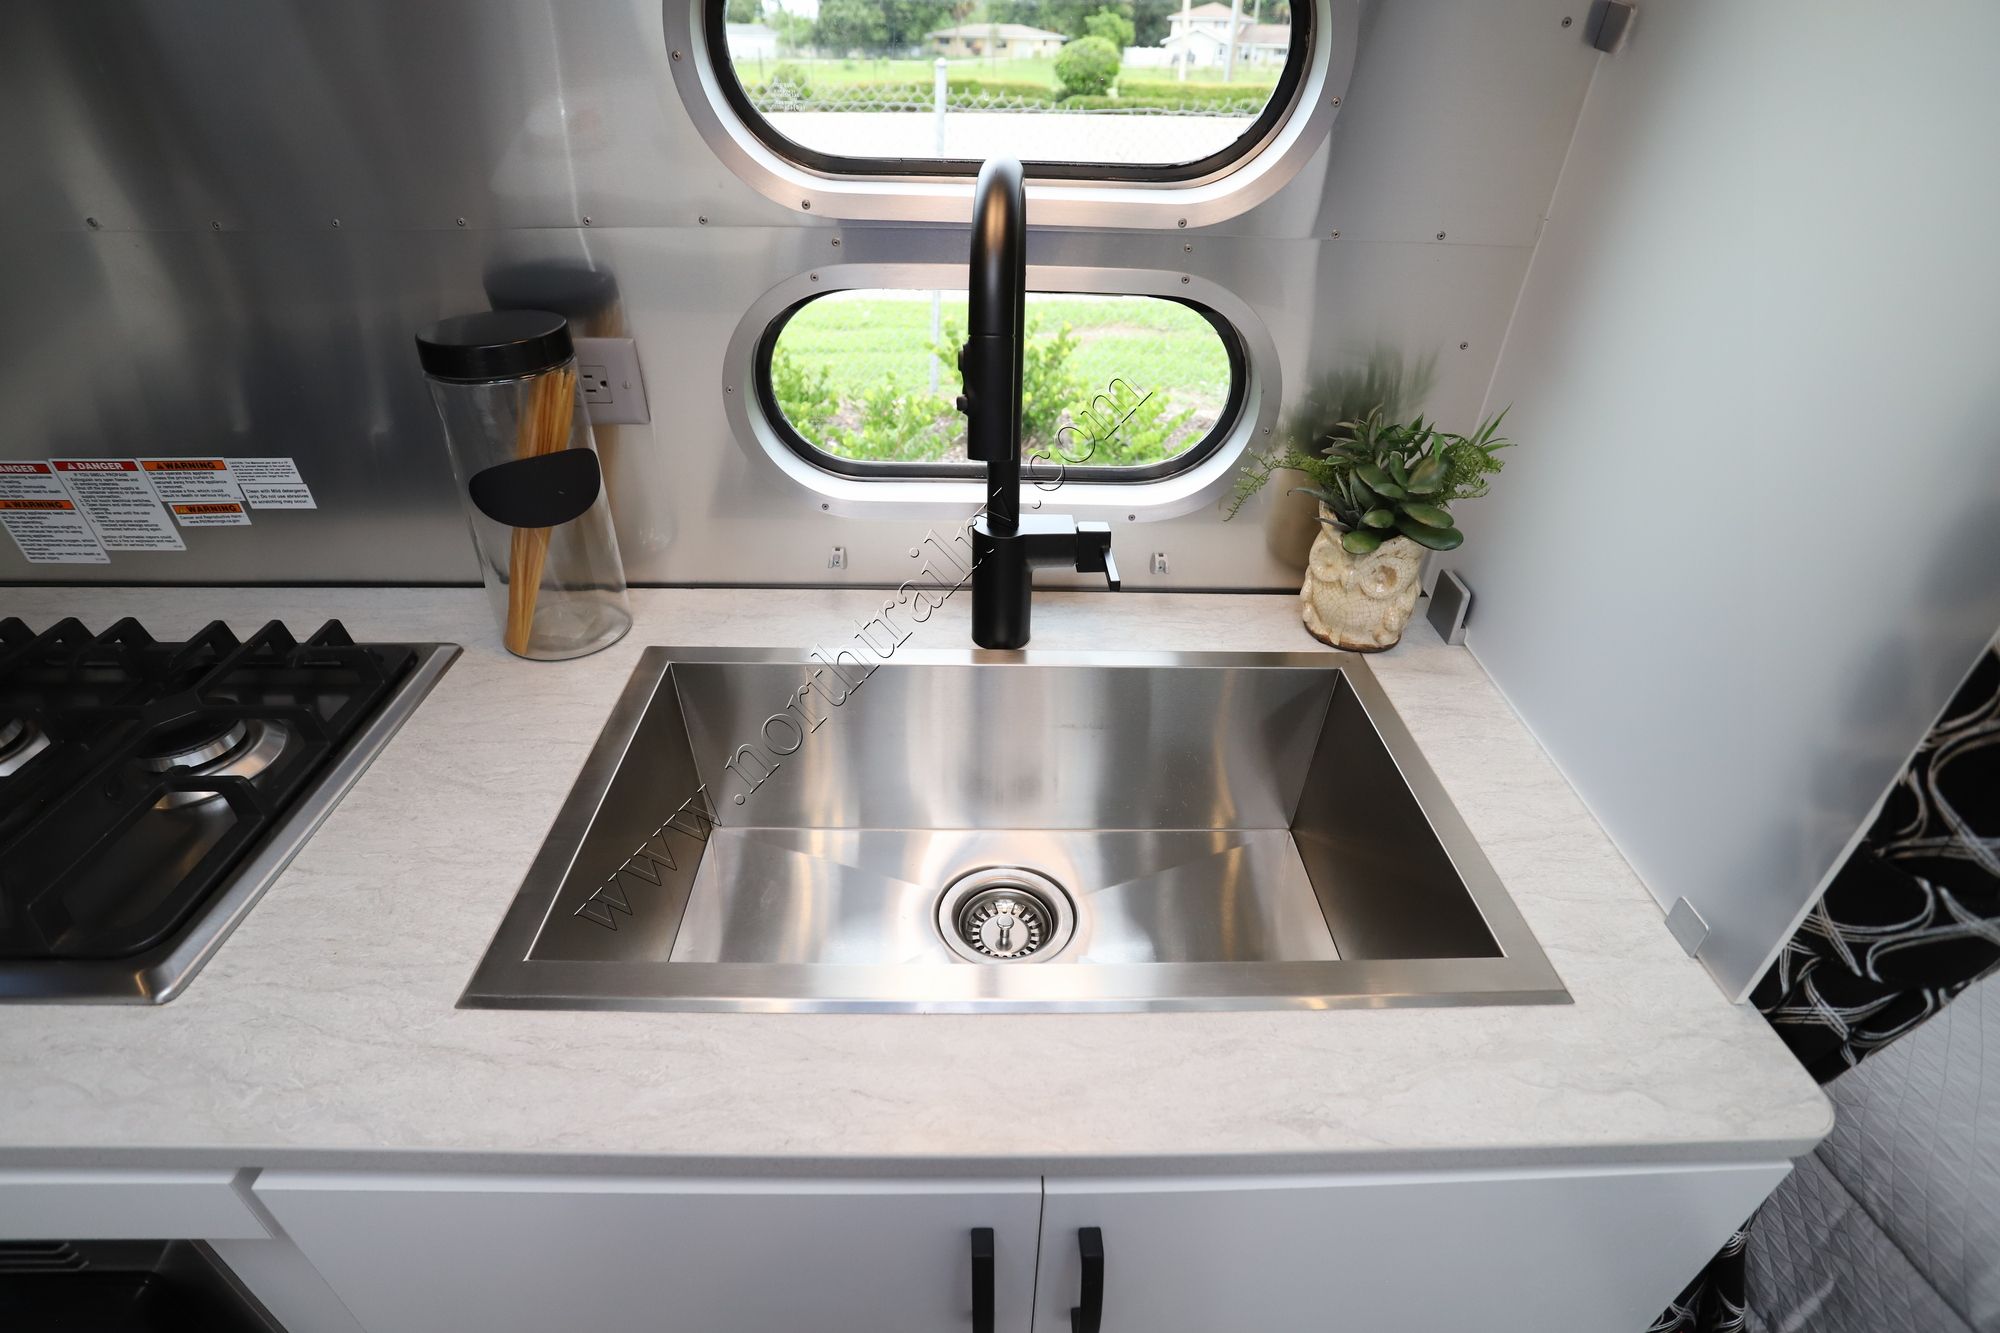 2022 Airstream Caravel 22FB Travel Trailer Used  For Sale